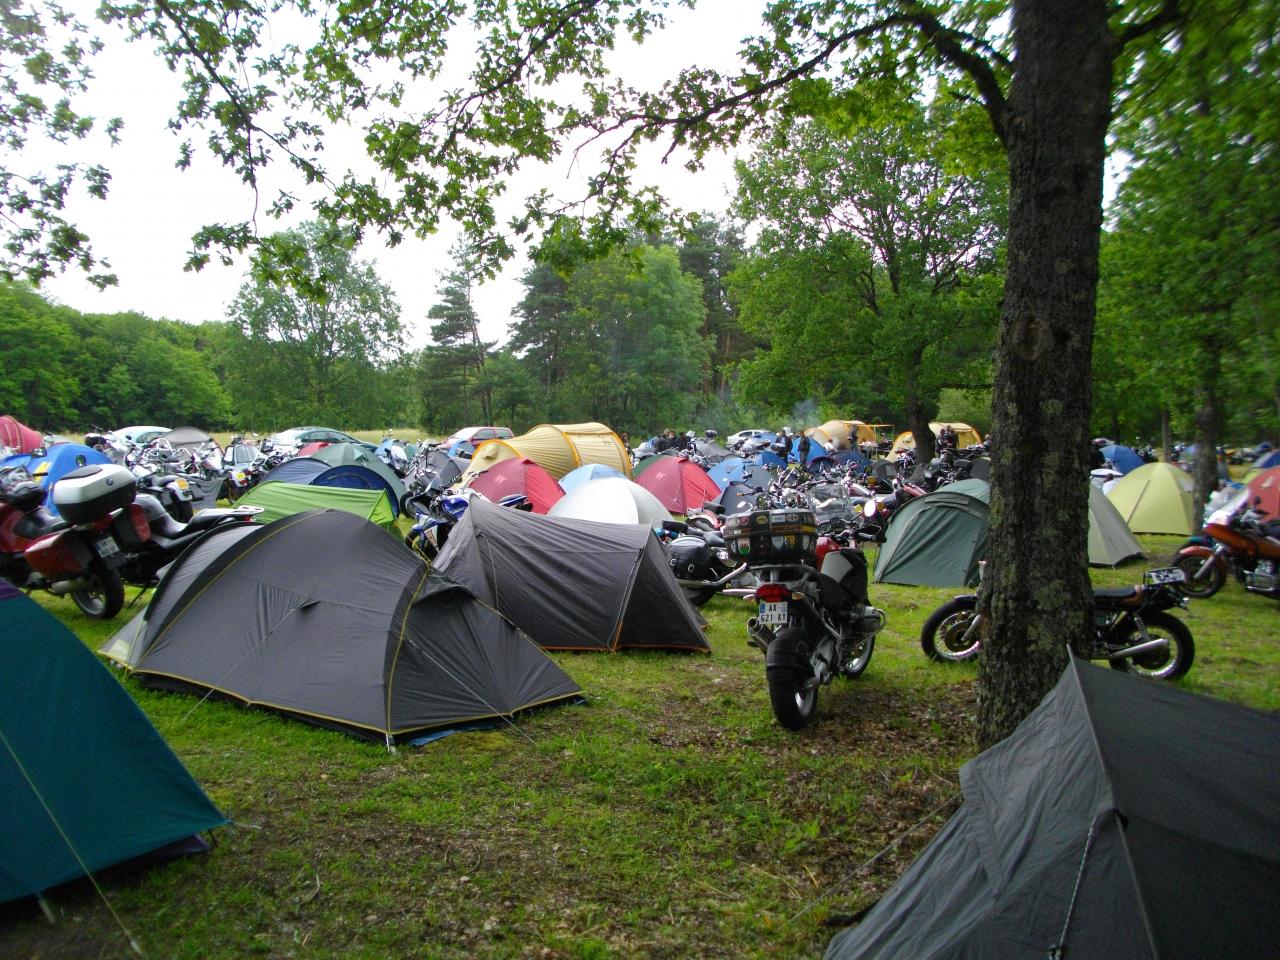 LE CAMPING